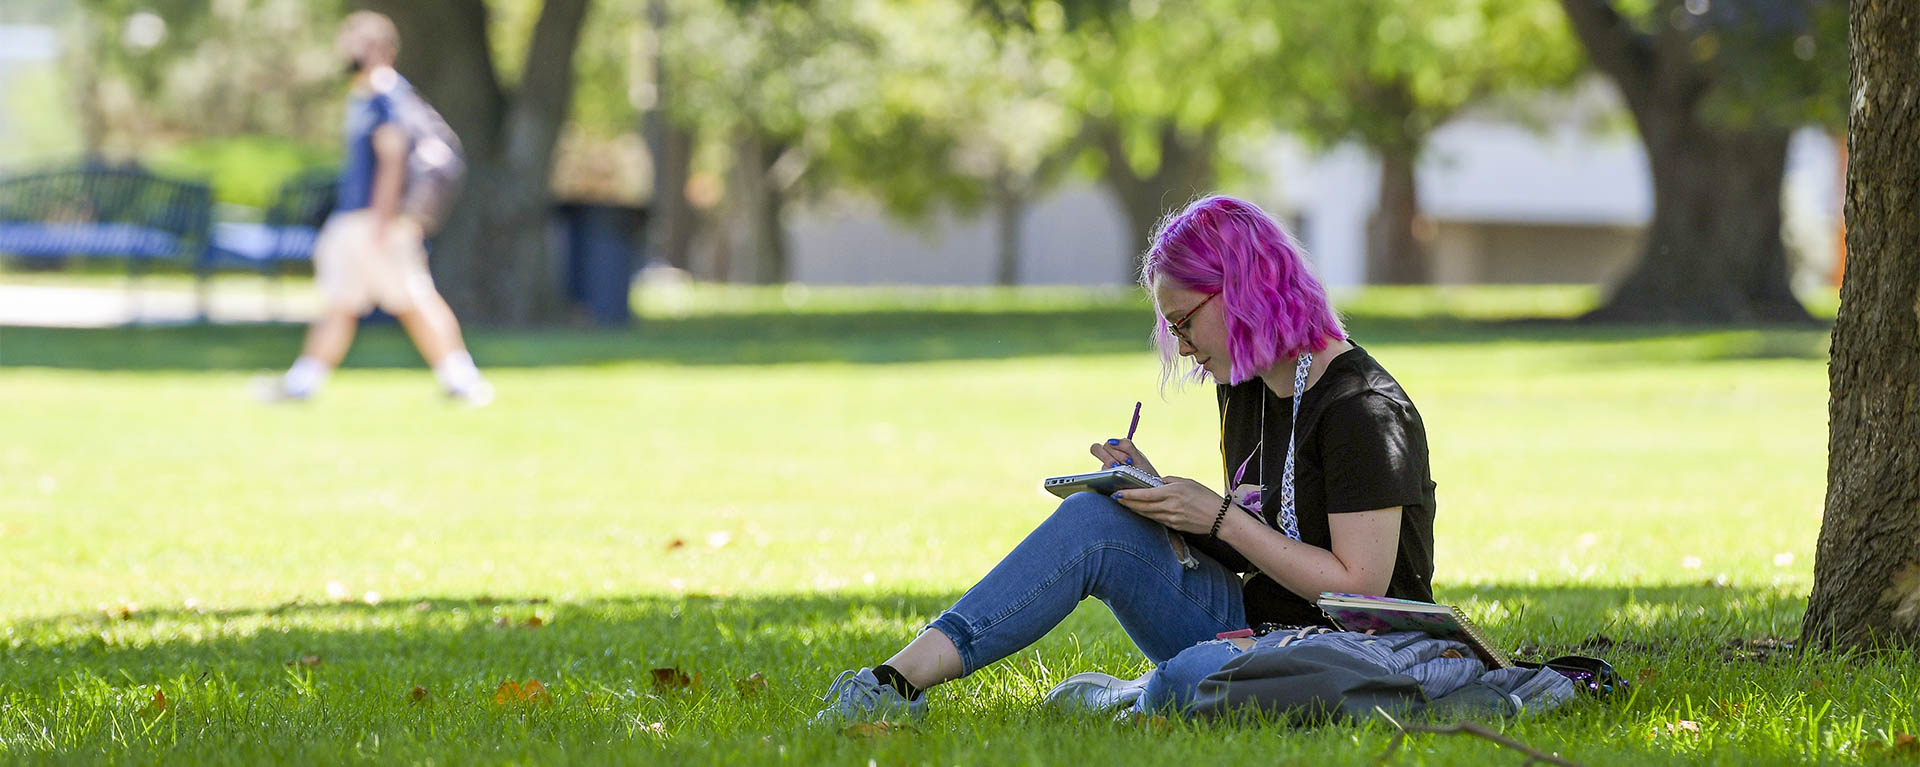 A student writes in a notebook while sitting in the grass under a tree on campus.